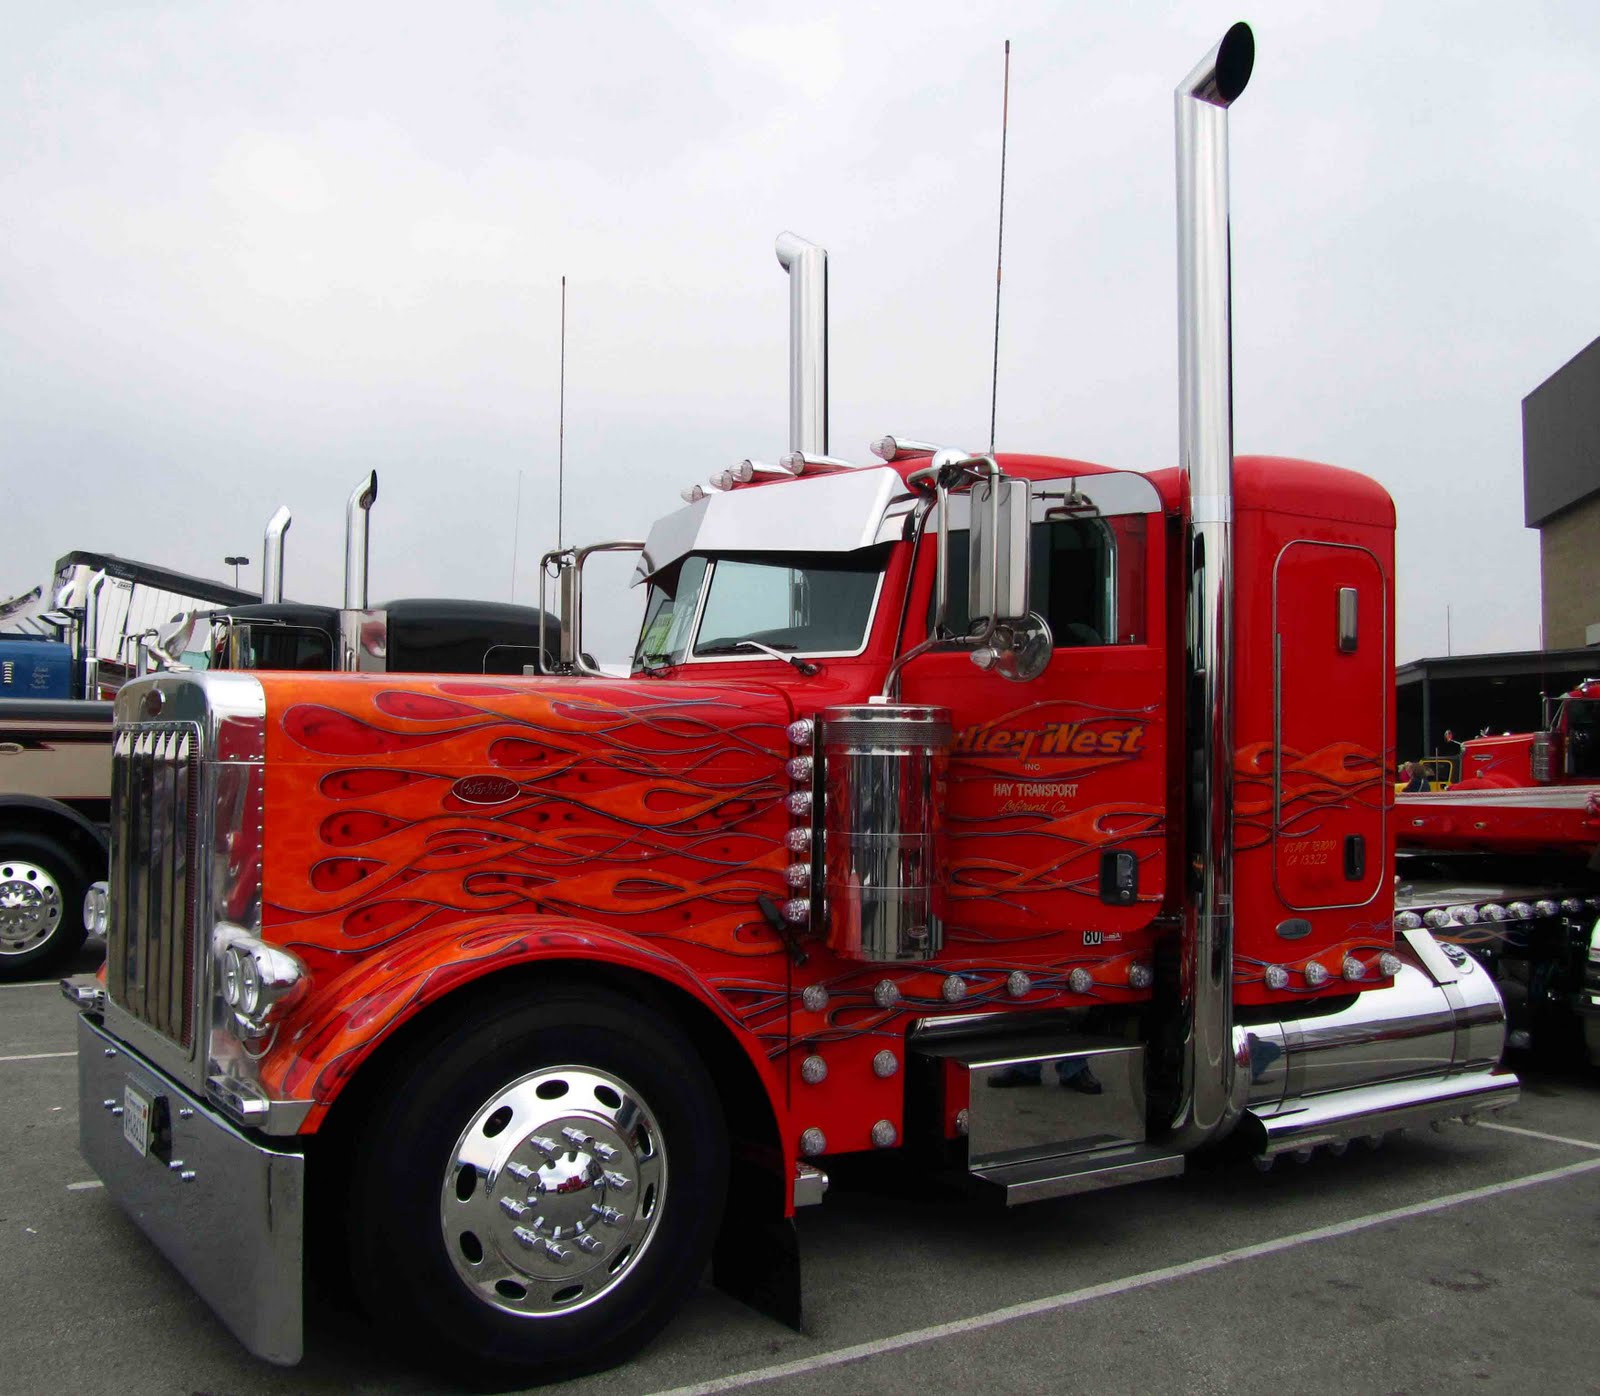 This Peterbilt has what every